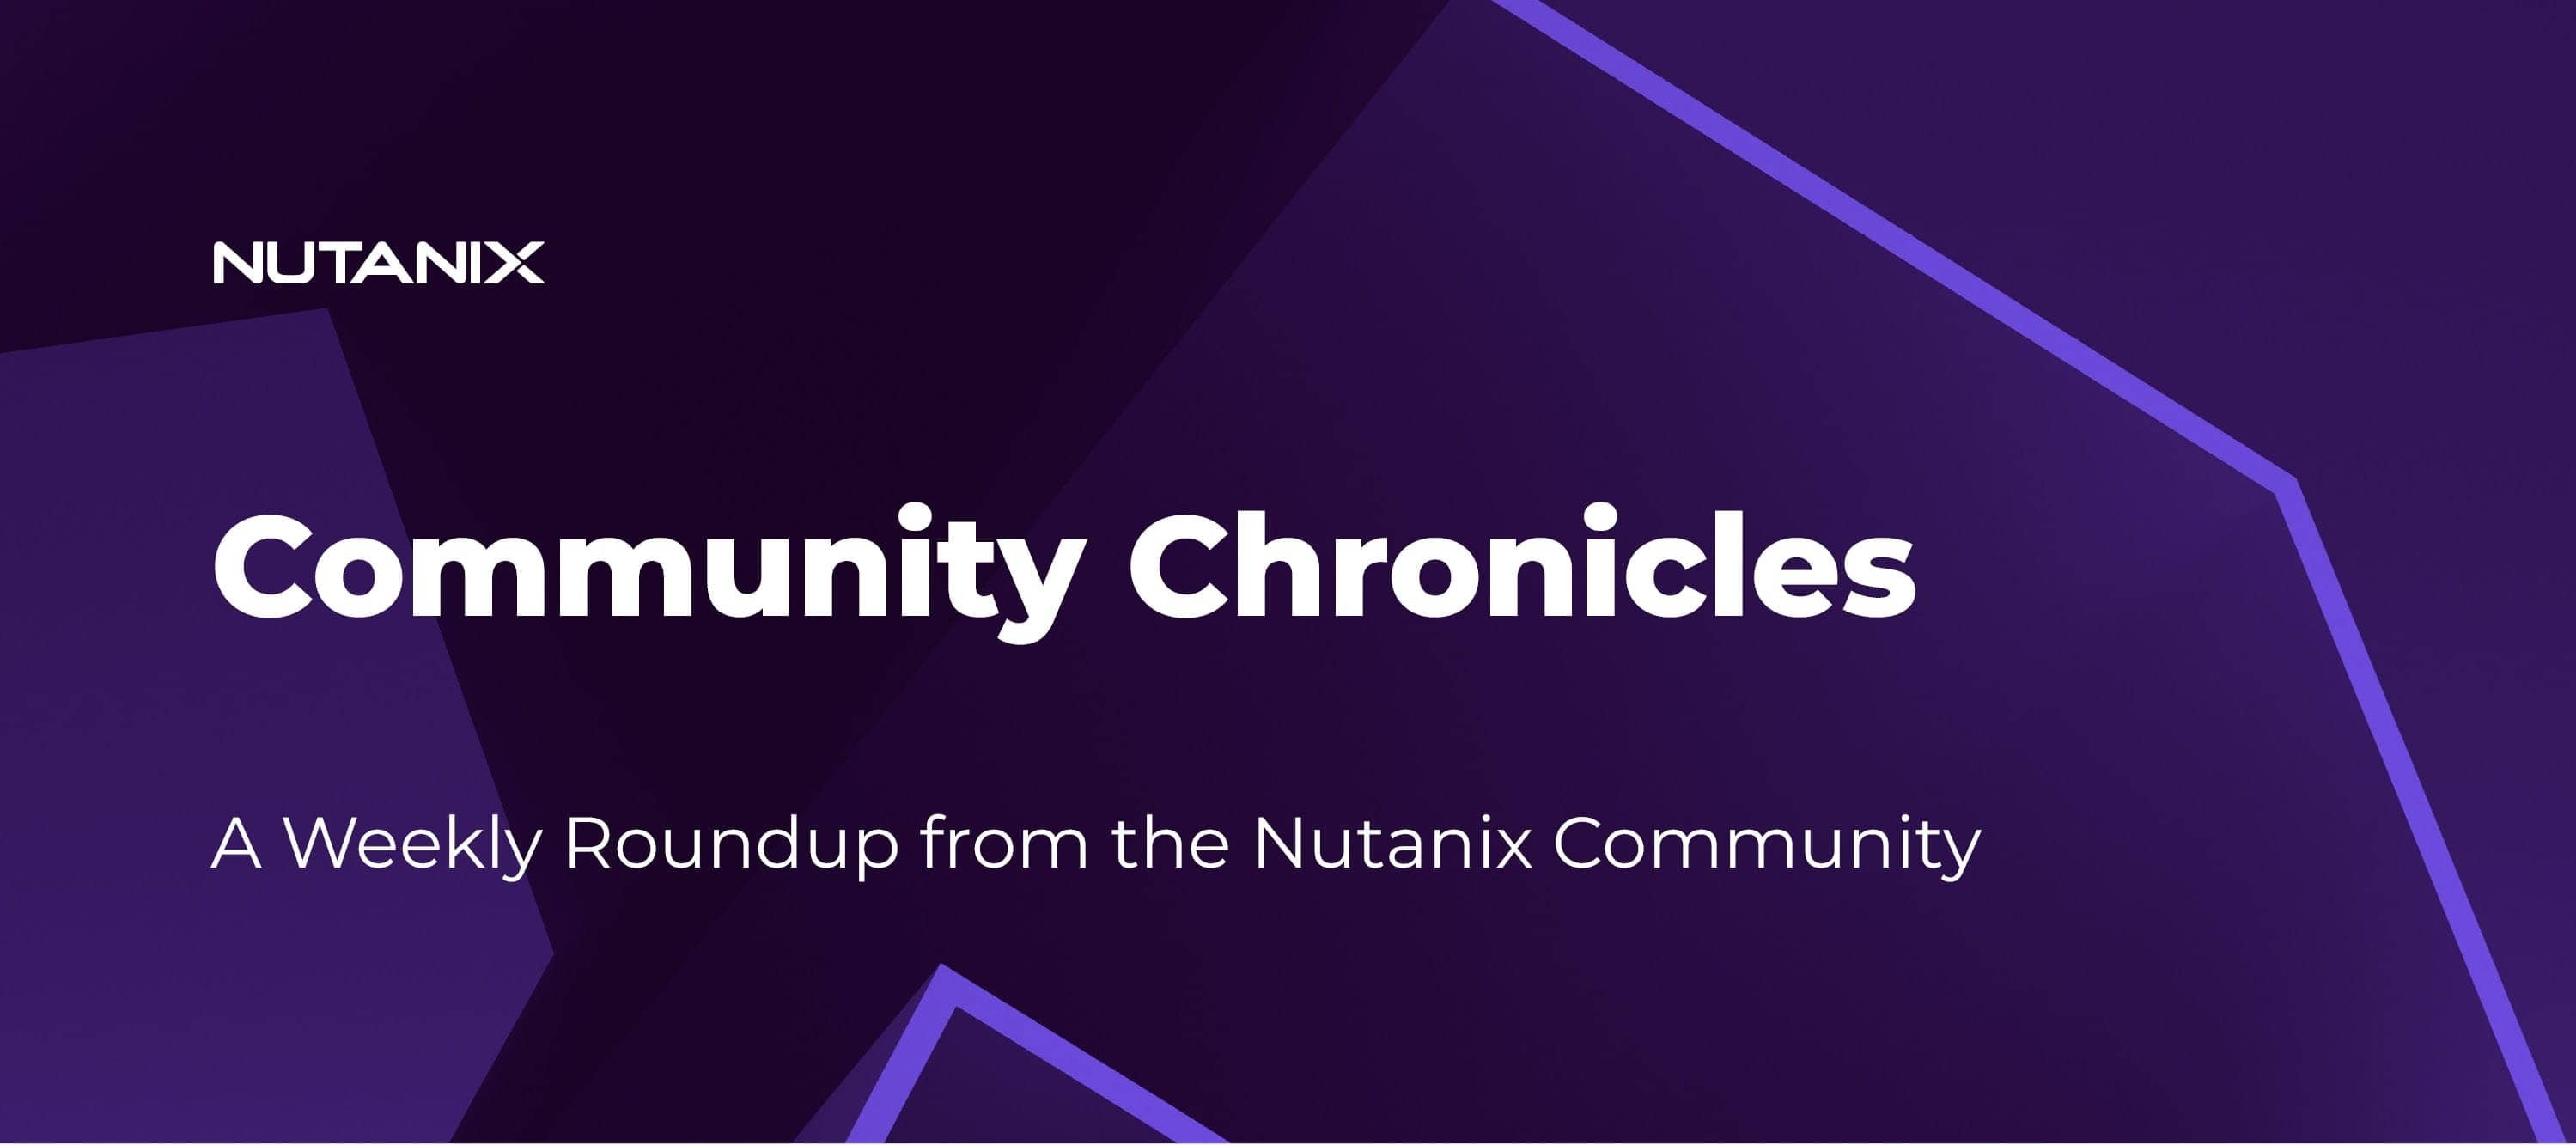 Community Chronicles: A Weekly Roundup from the Nutanix Community (April 9)